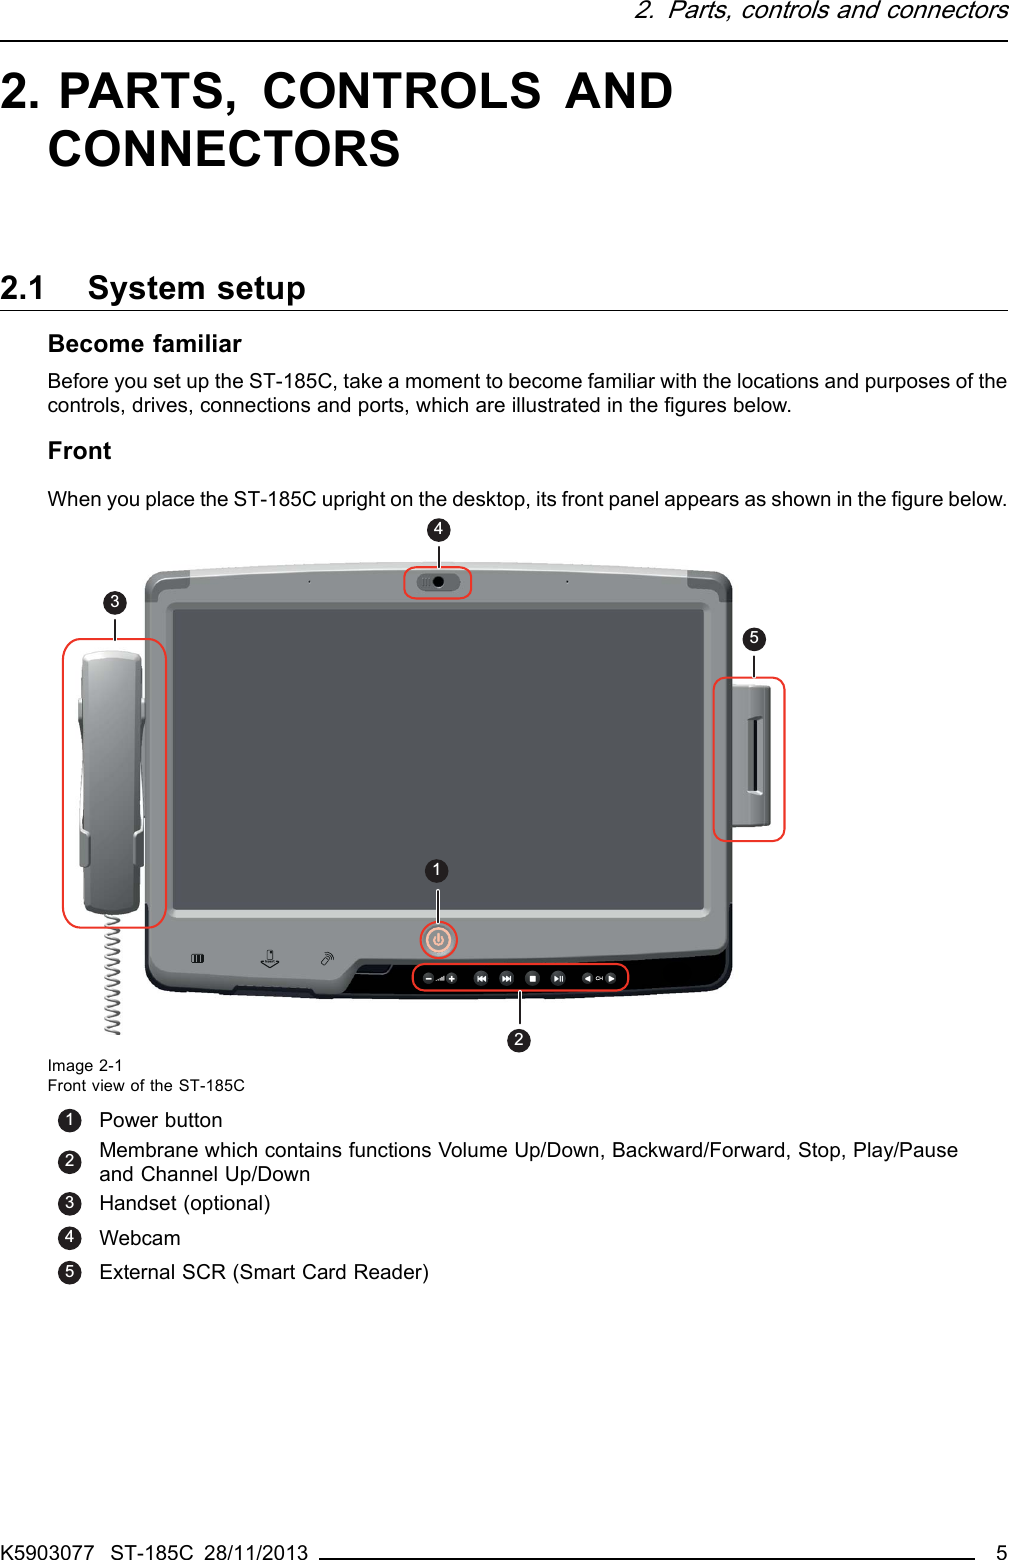 2. Parts, controls and connectors2. PARTS, CONTROLS ANDCONNECTORS2.1 System setupBecome familiarBefore you set up the ST-185C, take a moment to become familiar with the locations and purposes of thecontrols, drives, connections and ports, which are illustrated in the ﬁgures below.FrontWhen you place the ST-185C upright on the desktop, its front panel appears as shown in the ﬁgure below.12435Image 2-1Front view of the ST-185C1Power button2Membrane which contains functions Volume Up/Down, Backward/Forward, Stop, Play/Pauseand Channel Up/Down3Handset (optional)4Webcam5External SCR (Smart Card Reader)K5903077 ST-185C 28/11/2013 5